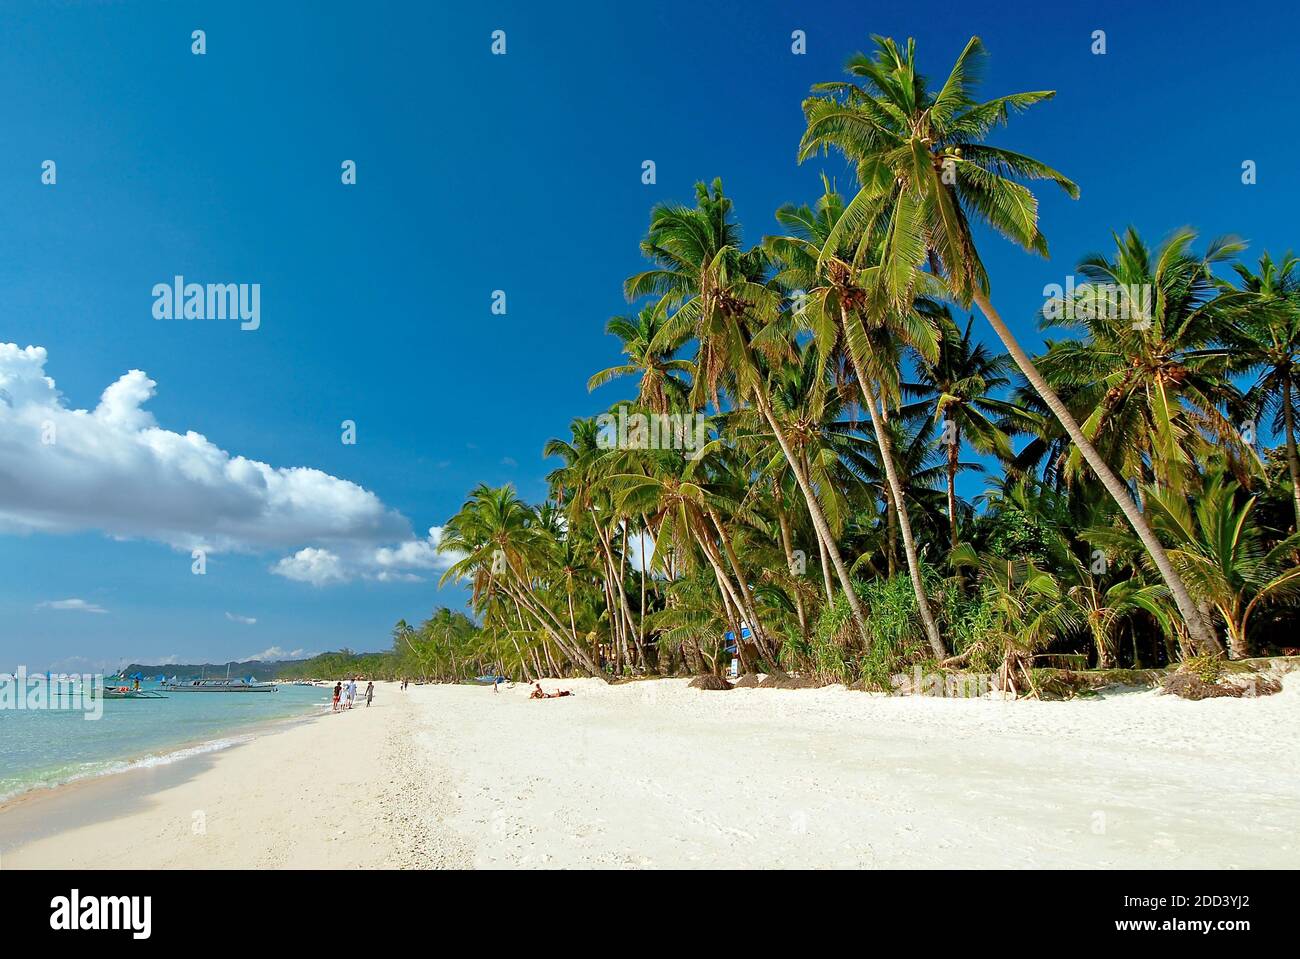 Scenic view of the beautiful empty sandy White Beach with coconut palm trees on Boracay Island, Aklan Province, Visayas, Philippines, Asia Stock Photo